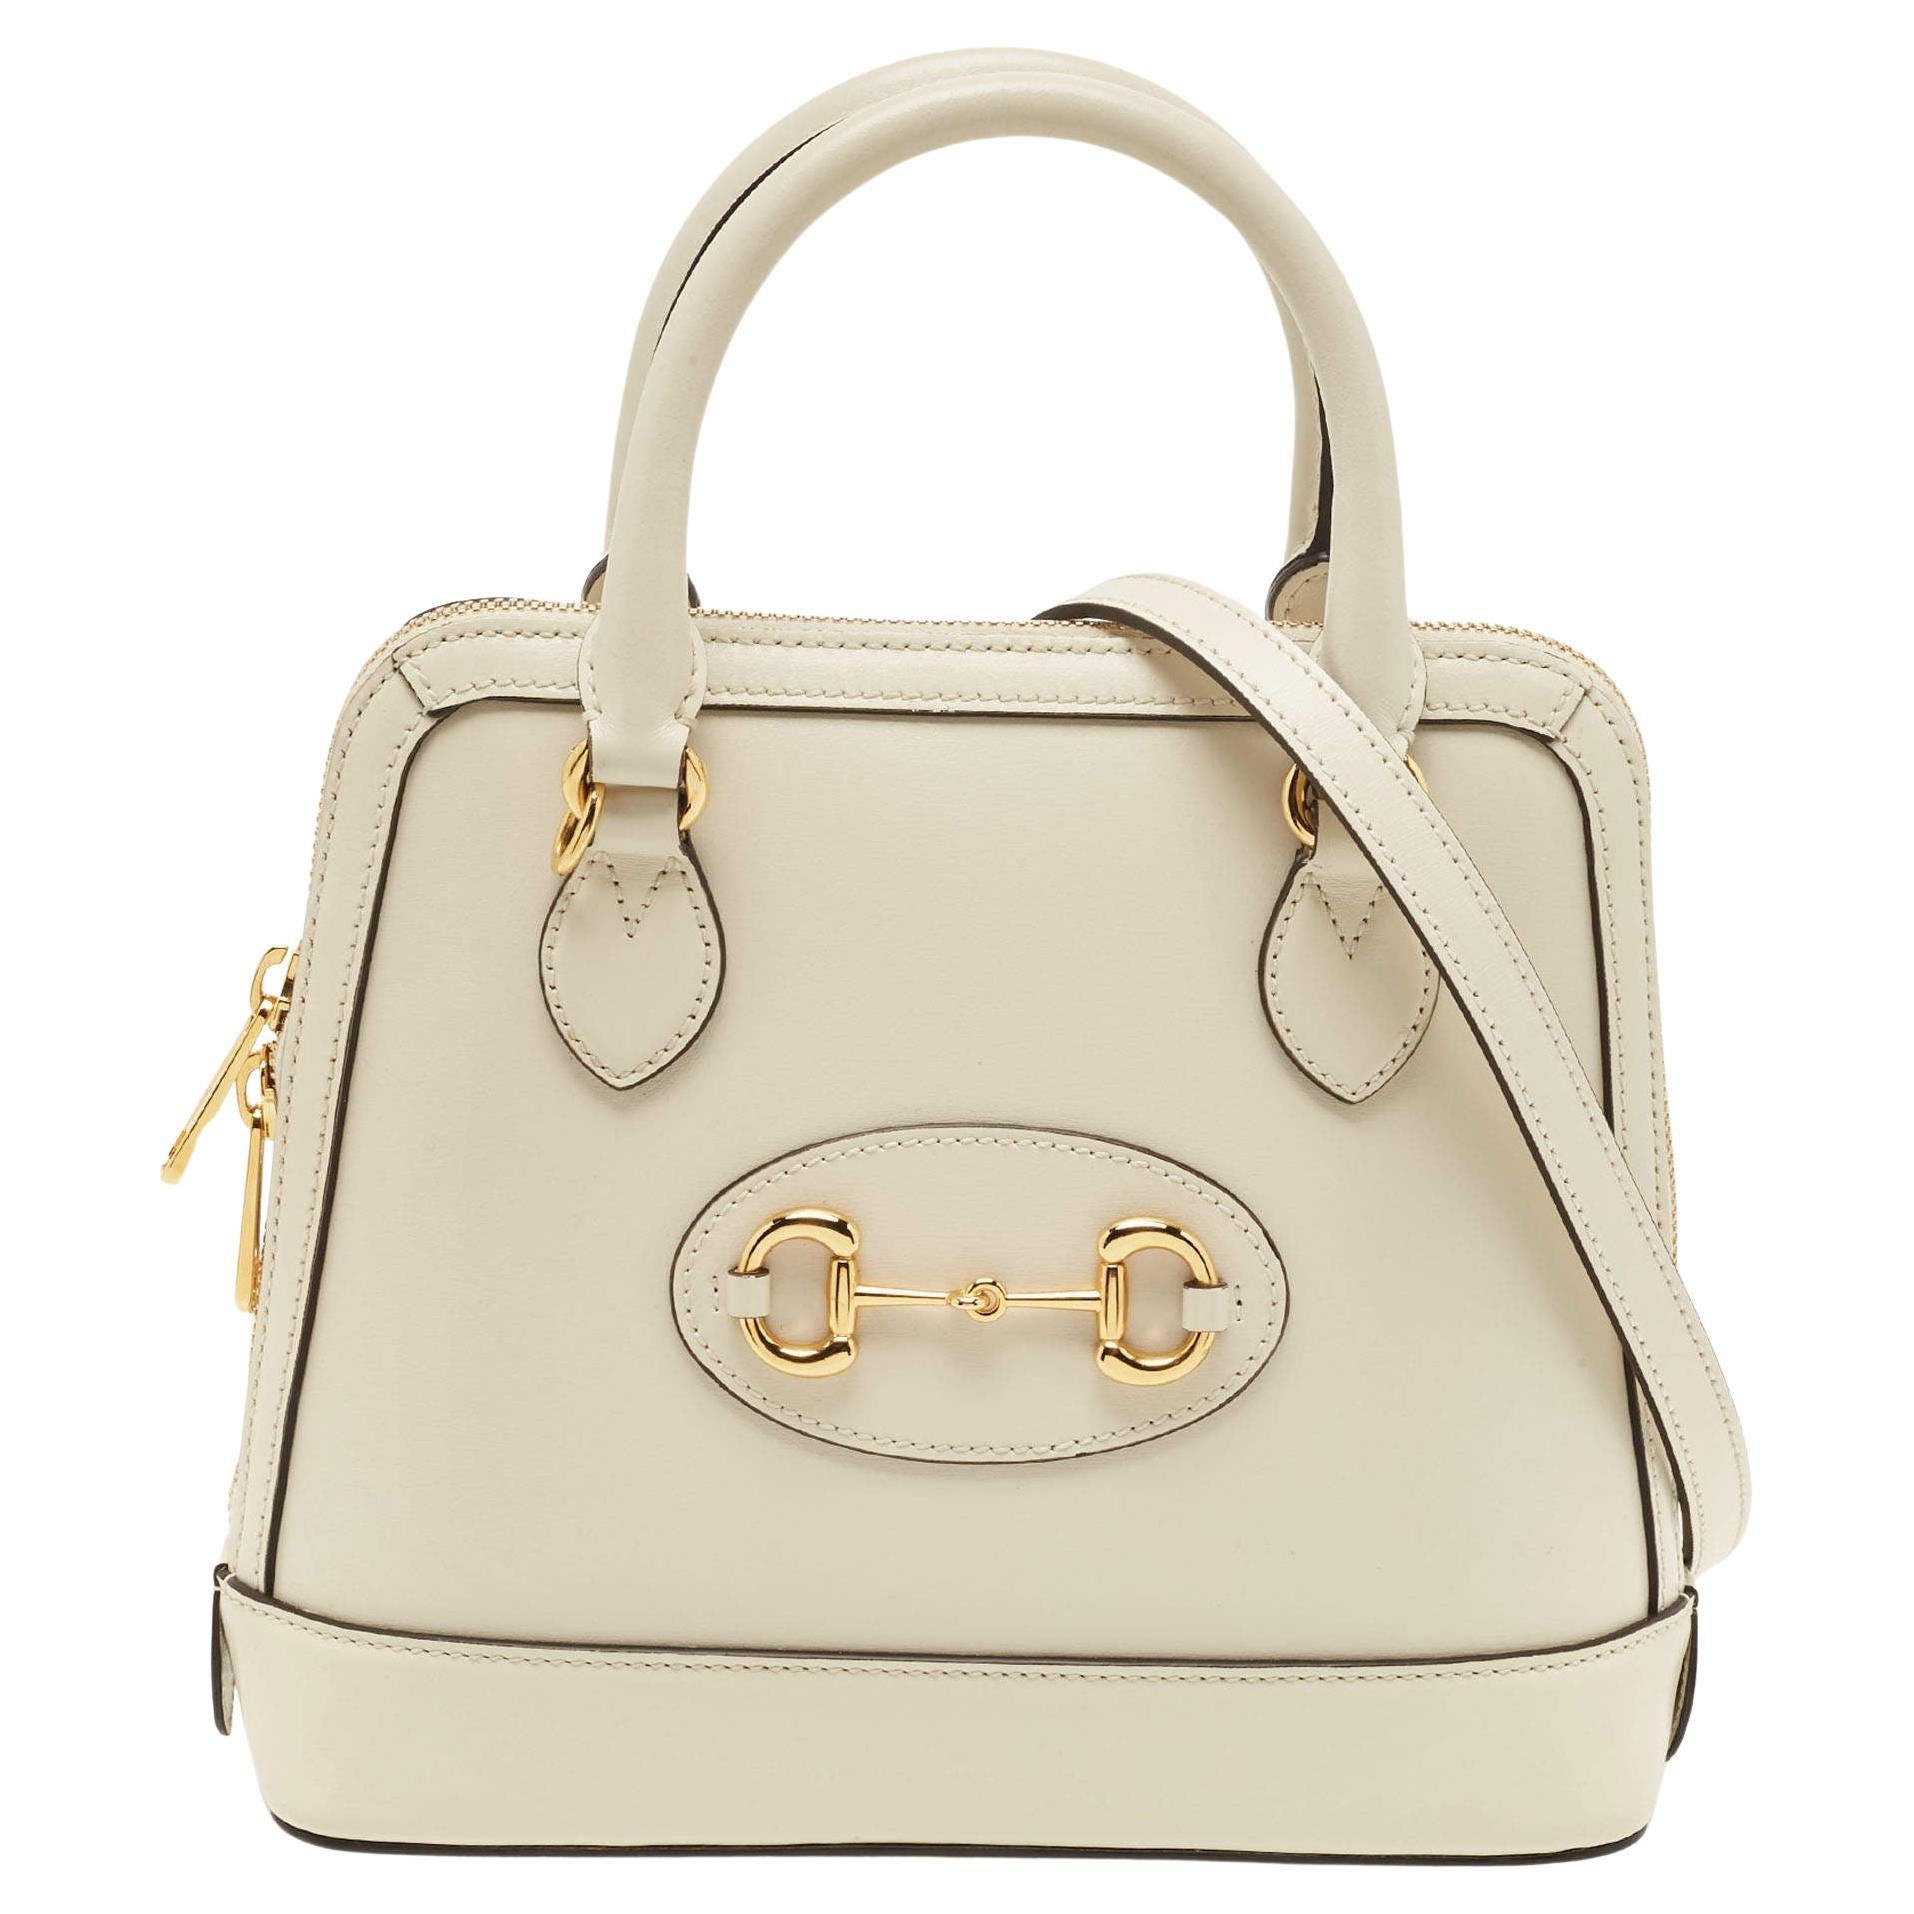 Gucci Off White Leather Small Horsebit 1955 Satchel